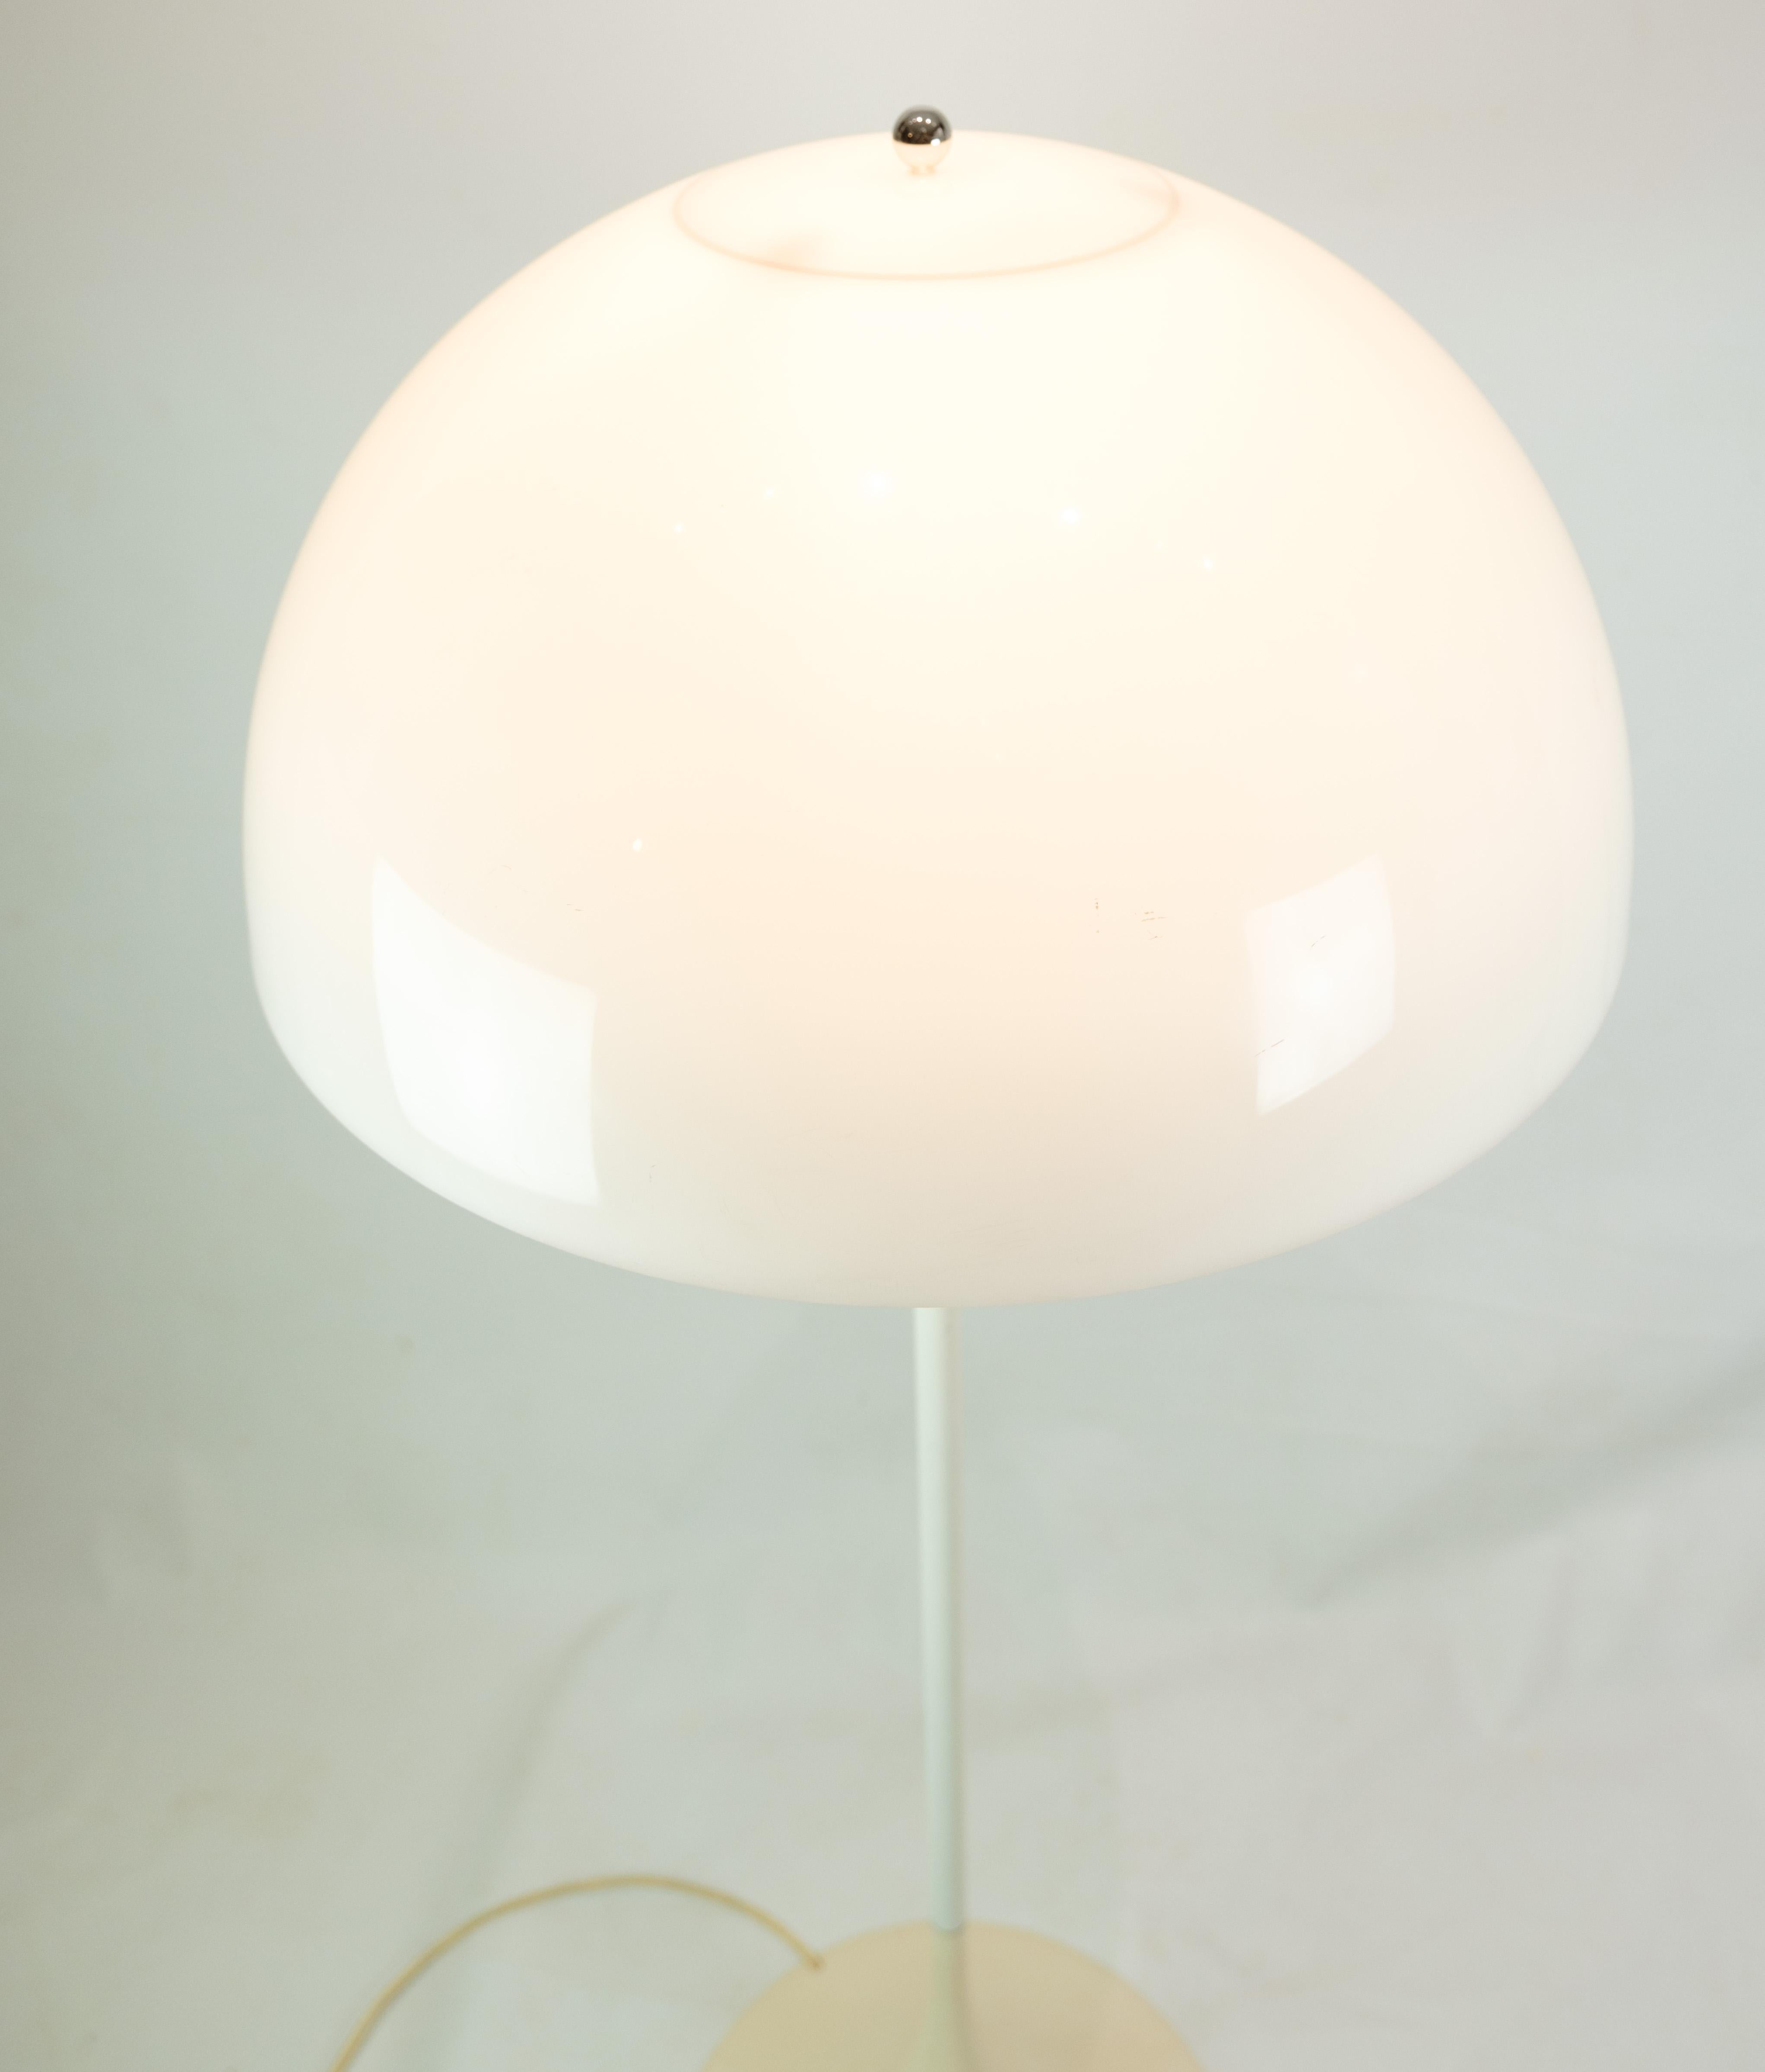 Danish Floor Lamp Model Panthella By Verner Panton For Louis Poulsen From 1980s For Sale